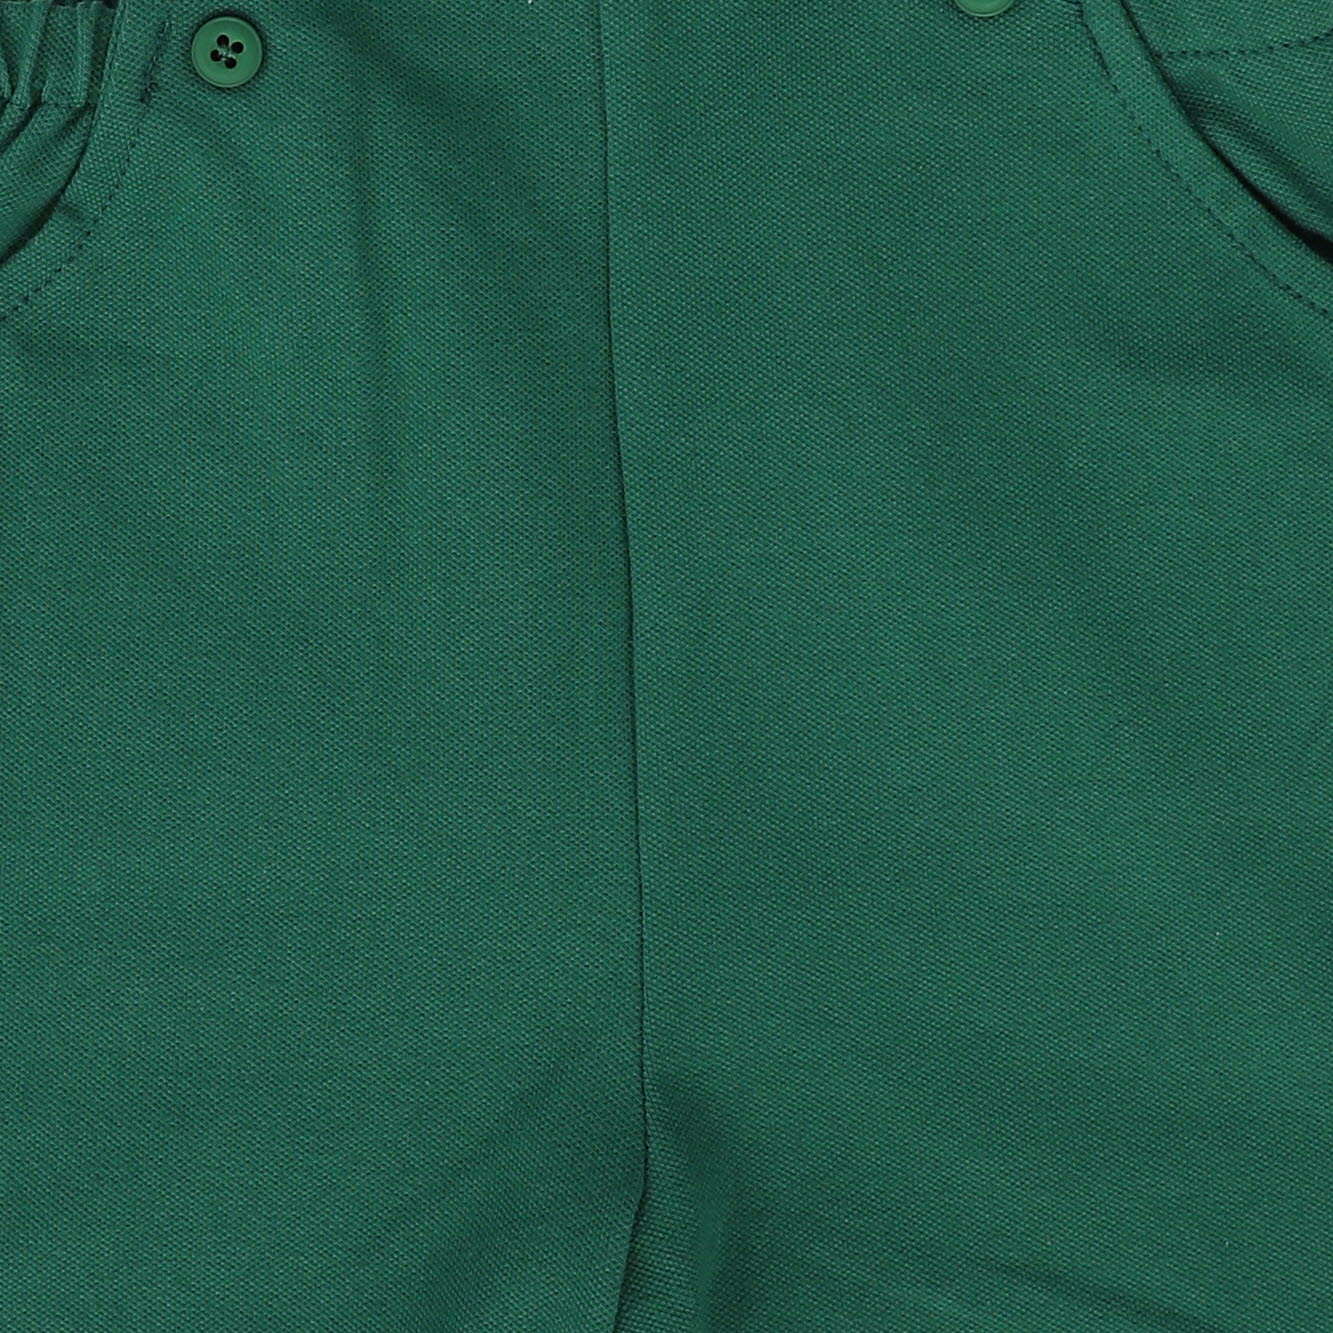 BACE COLLECTION GREEN PIQUE OVERALLS [FINAL SALE]